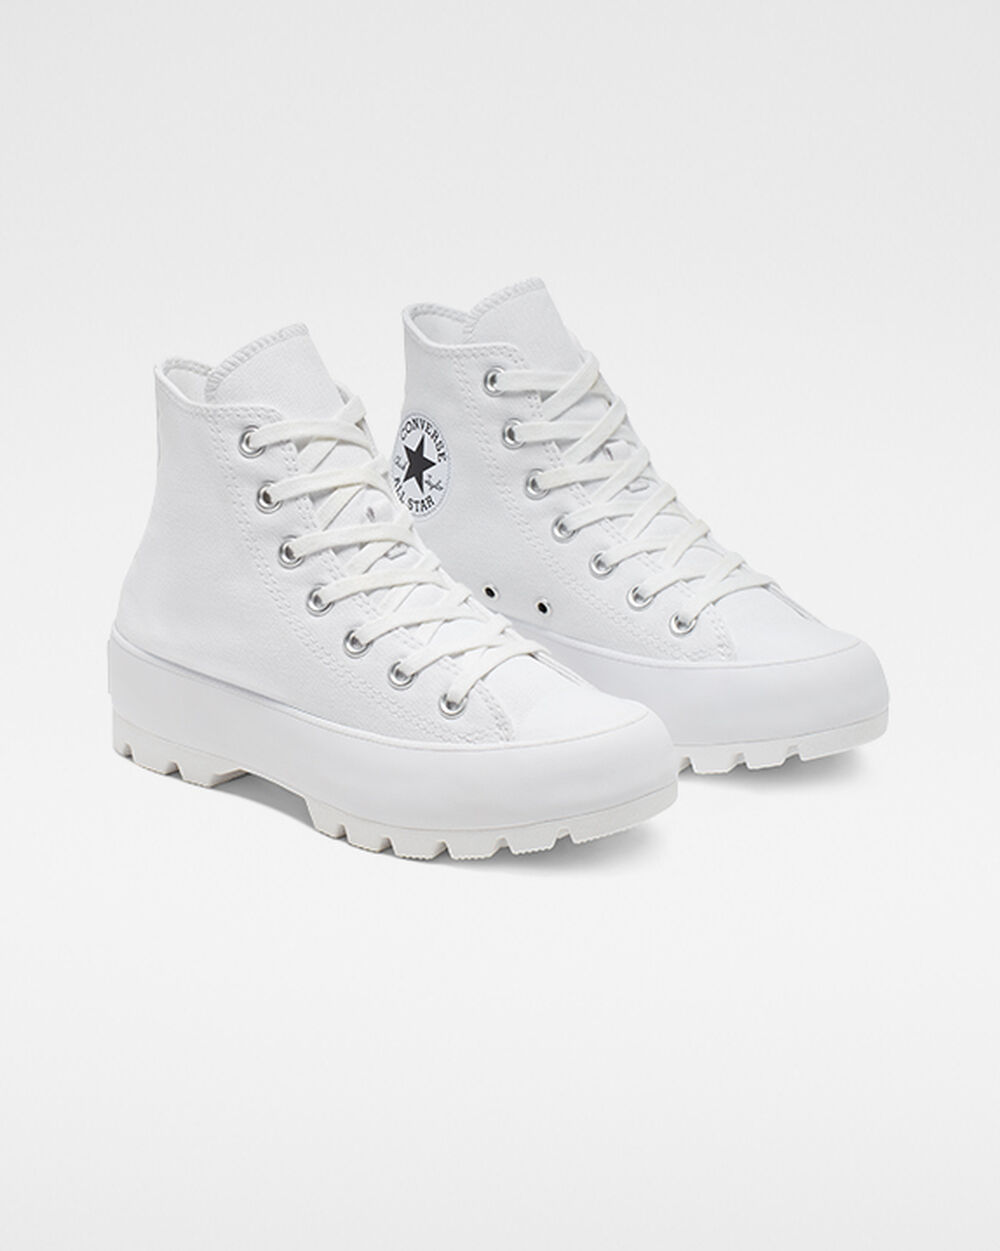 Tenis Converse Chuck Taylor All Star Lugged Mujer Blancos Negros Blancos | Mexico-463766